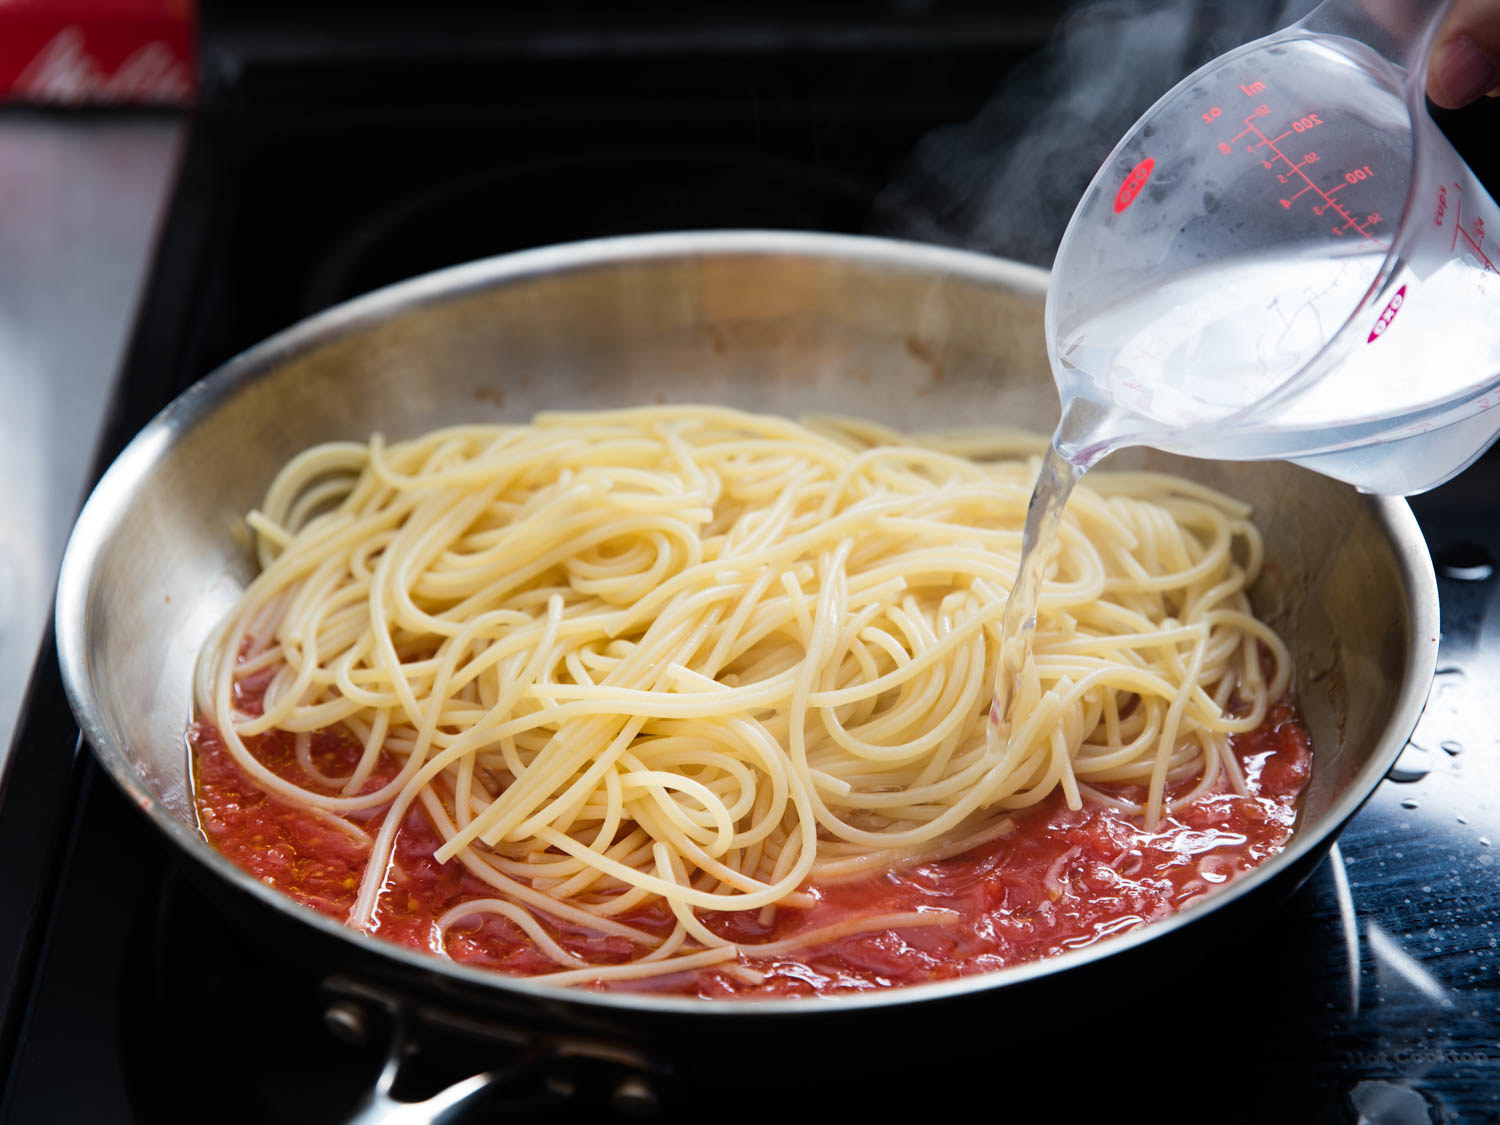 Pasta water being poured into a pan of pasta and tomato sauce